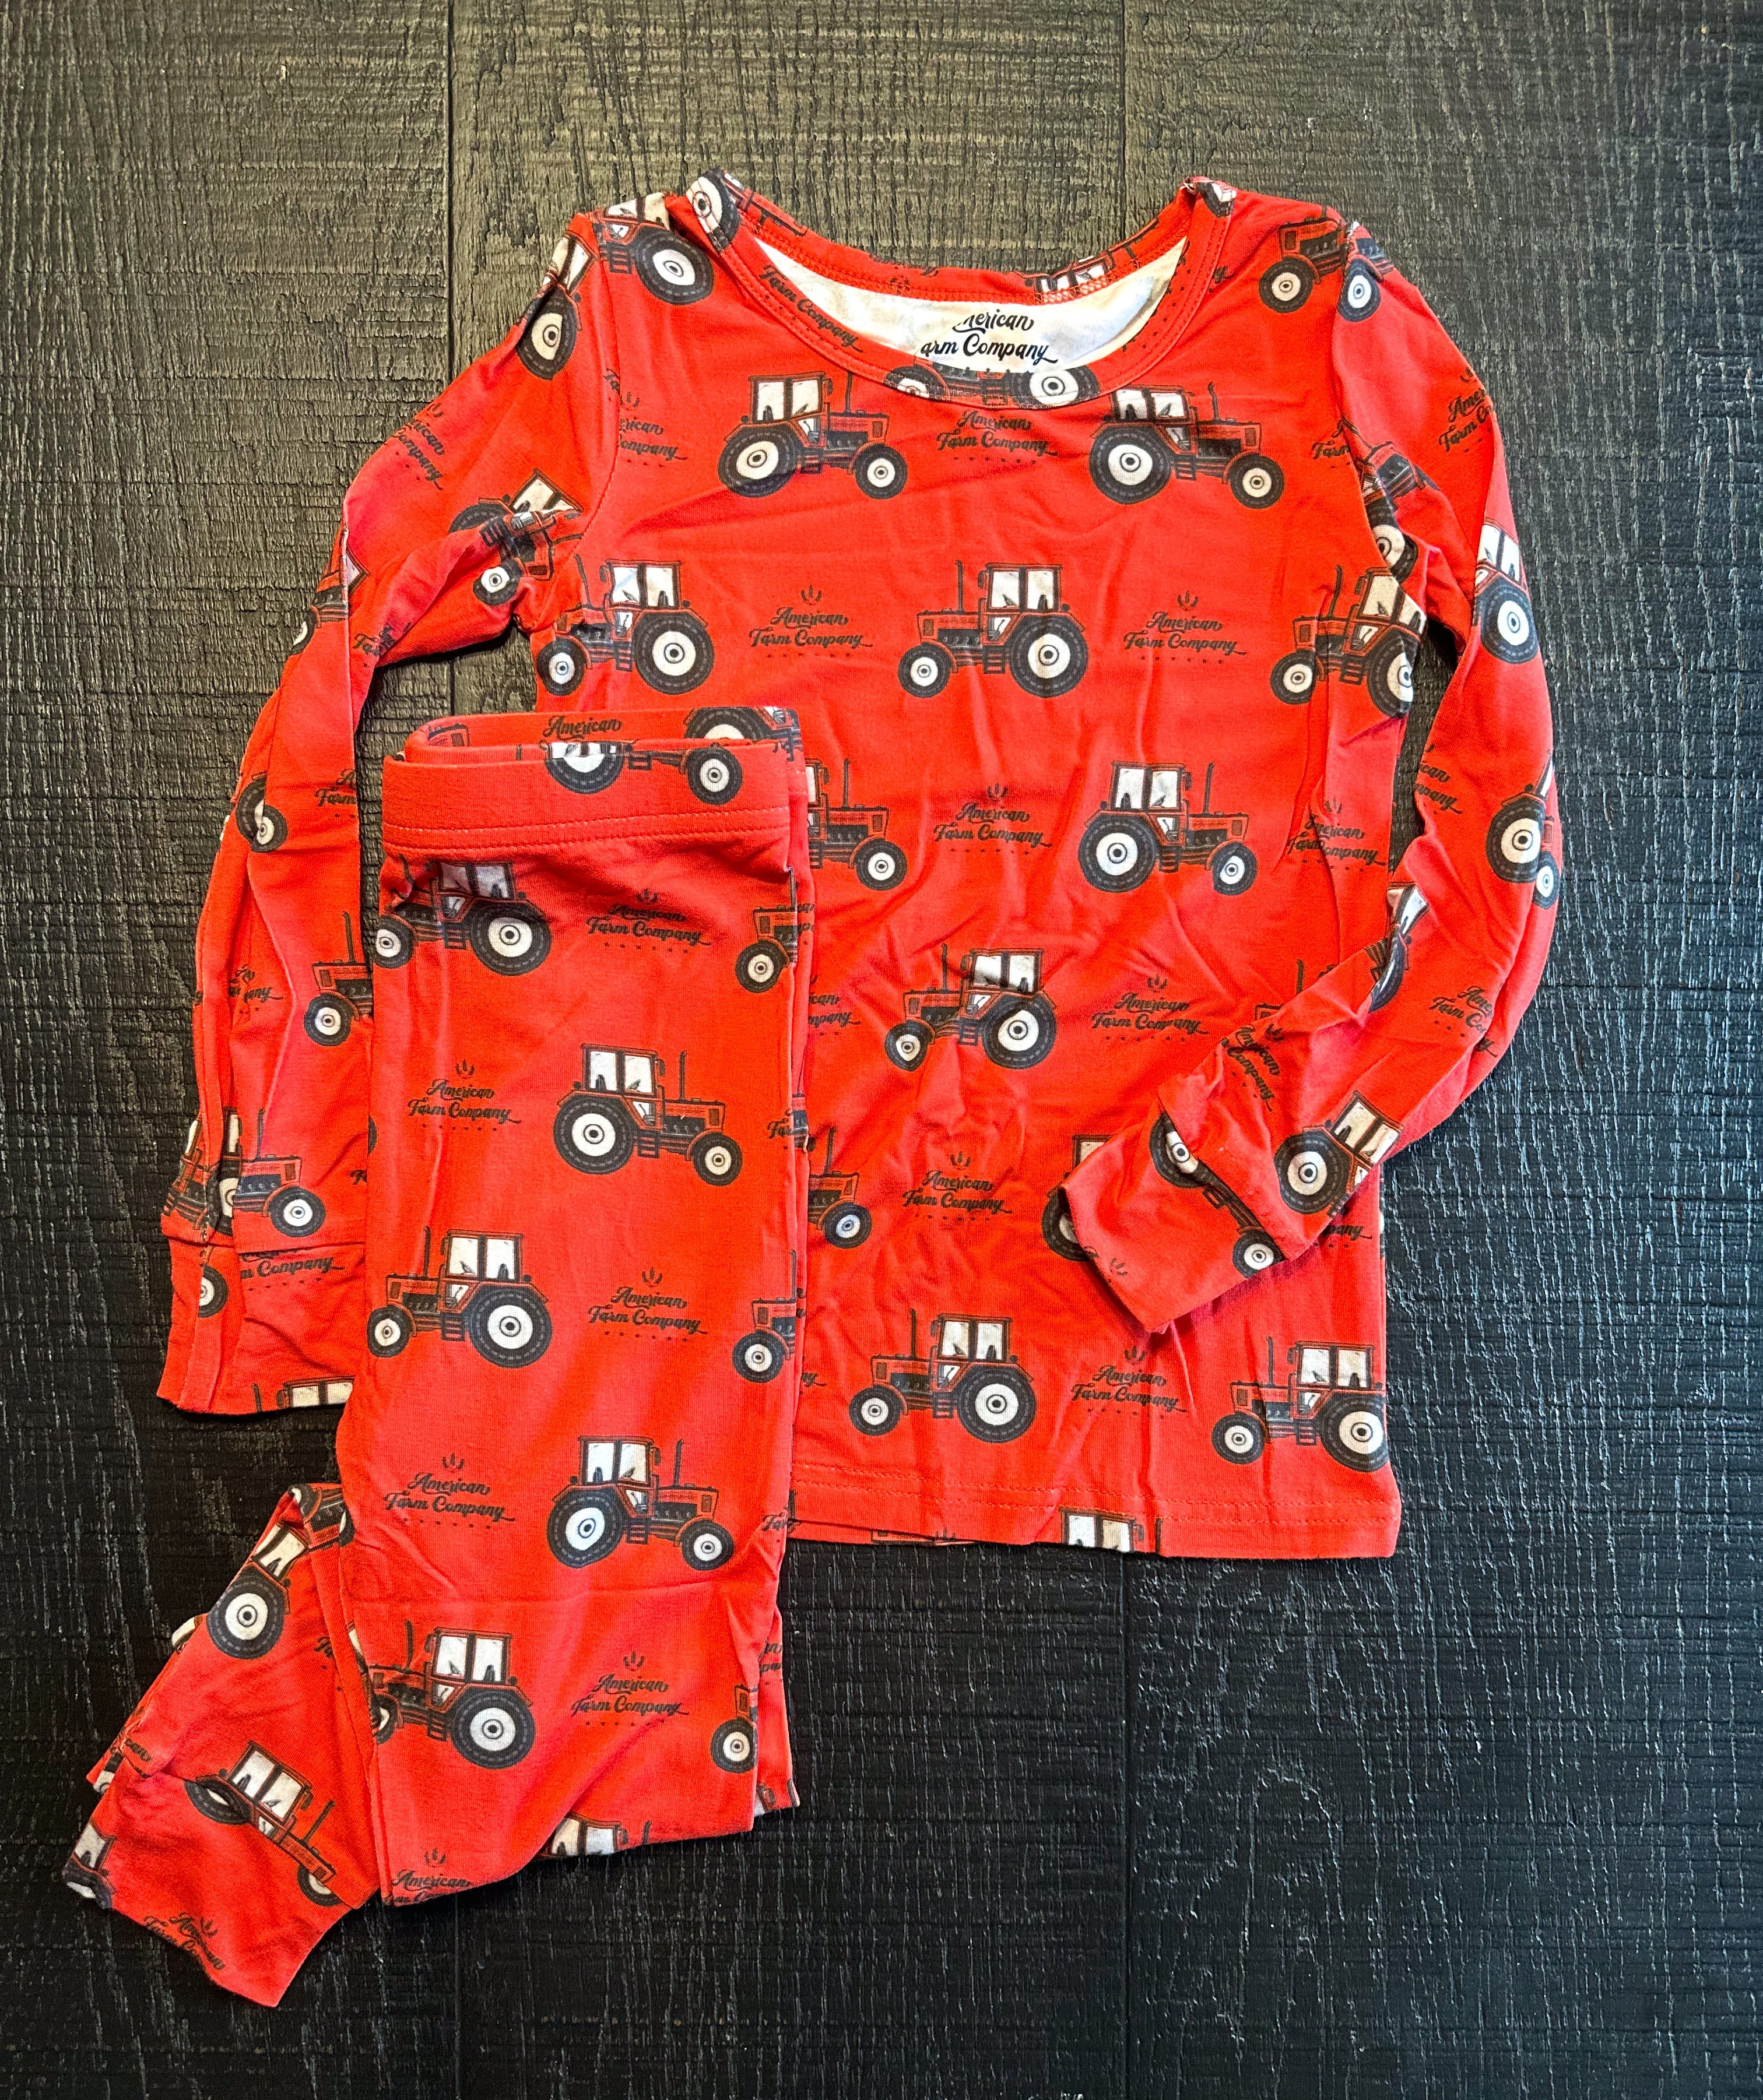 Red Tractor Toddler/Youth Pajamas